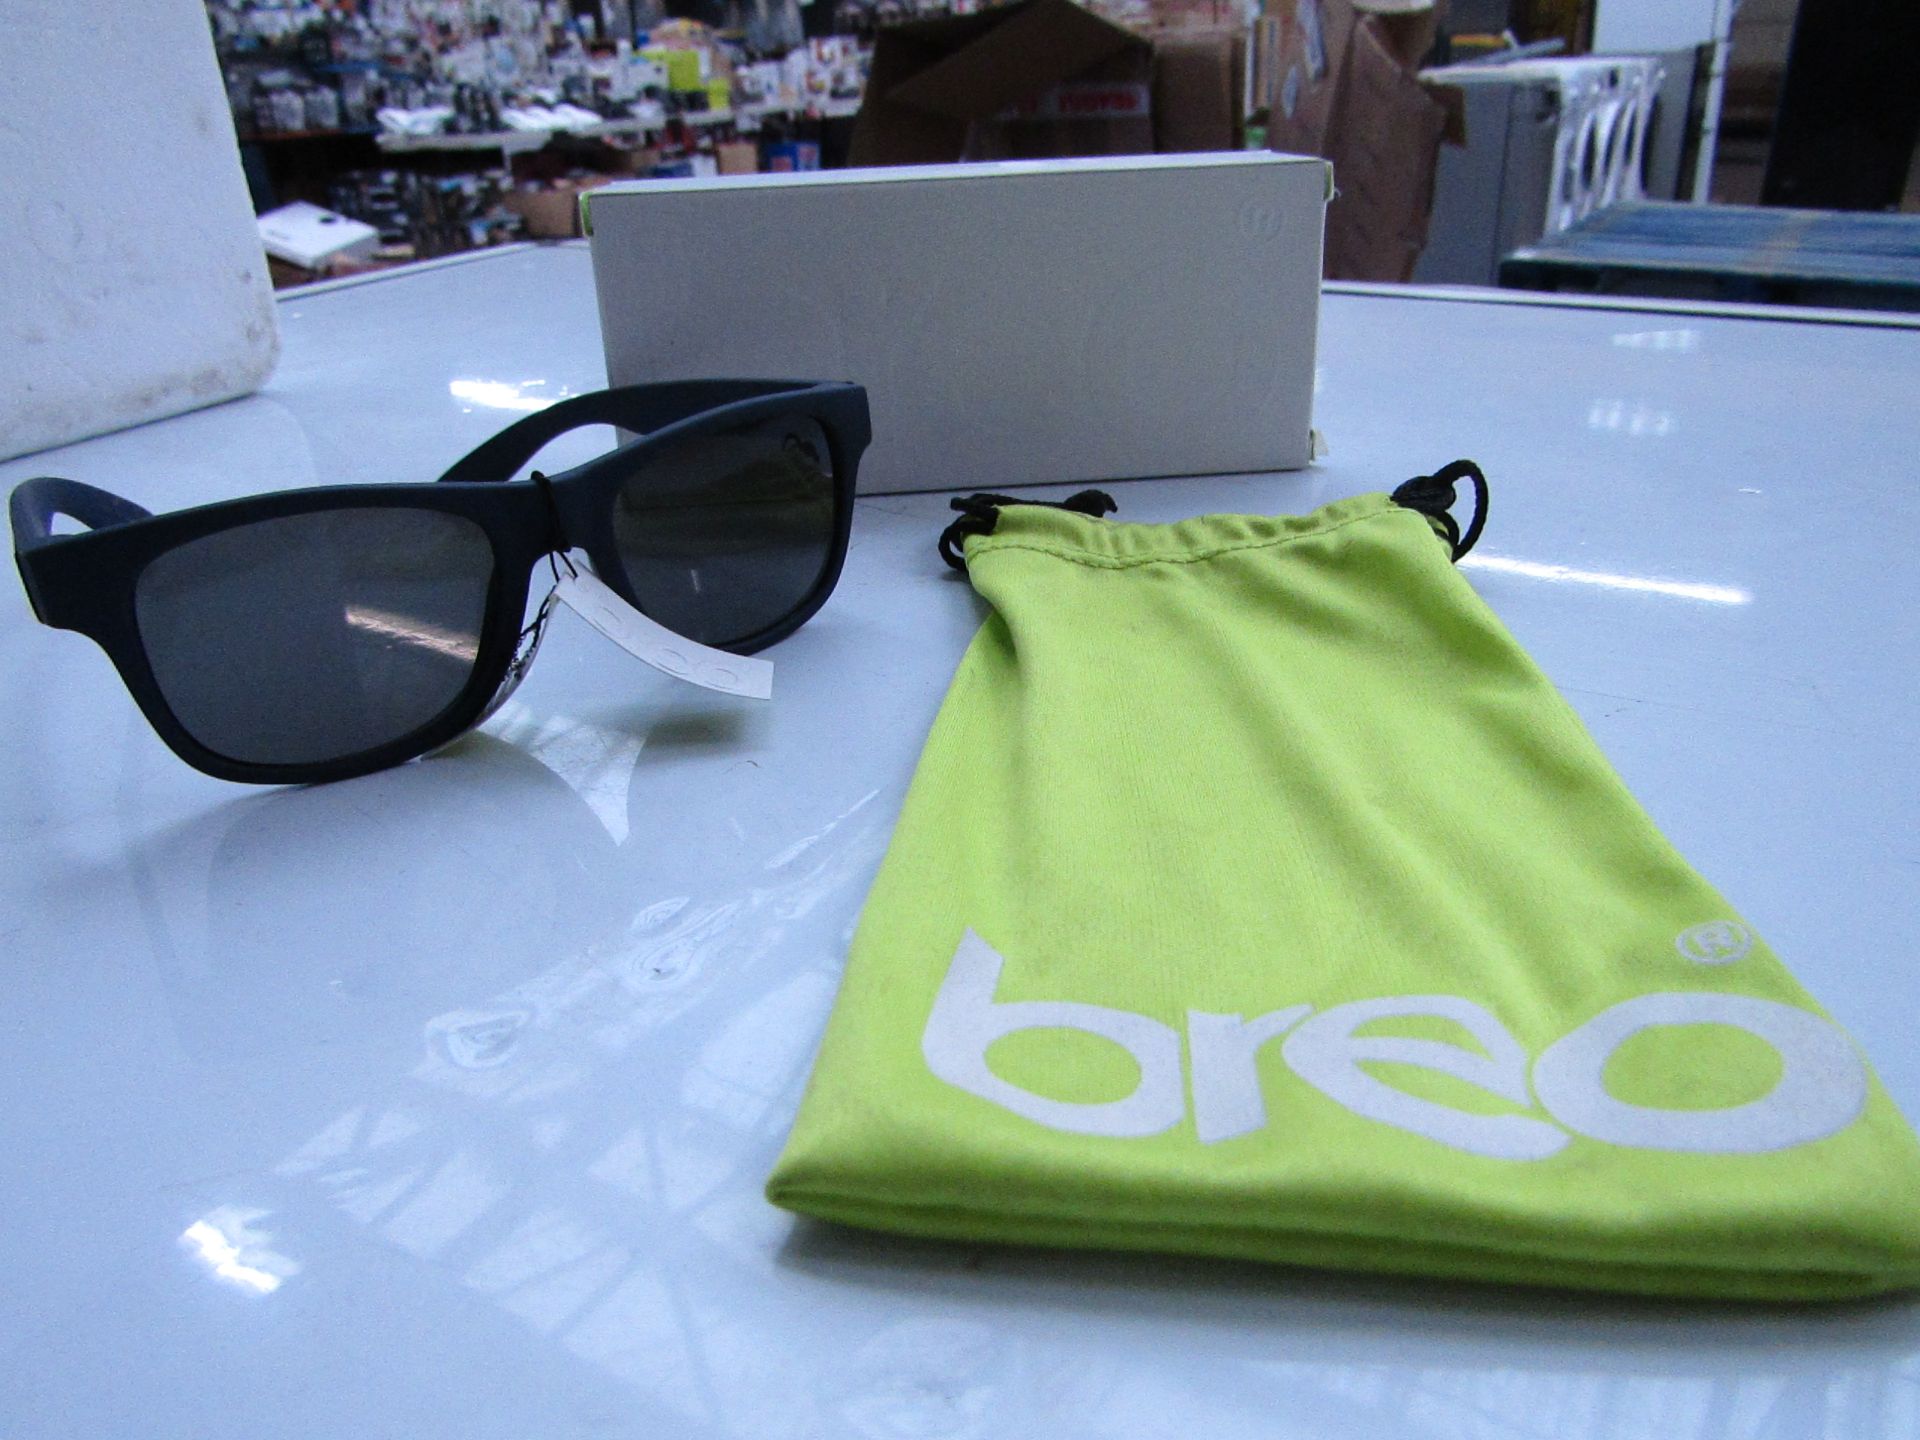 2x Pairs of Breo Uptone Childs Sunglasses, new in Packaging